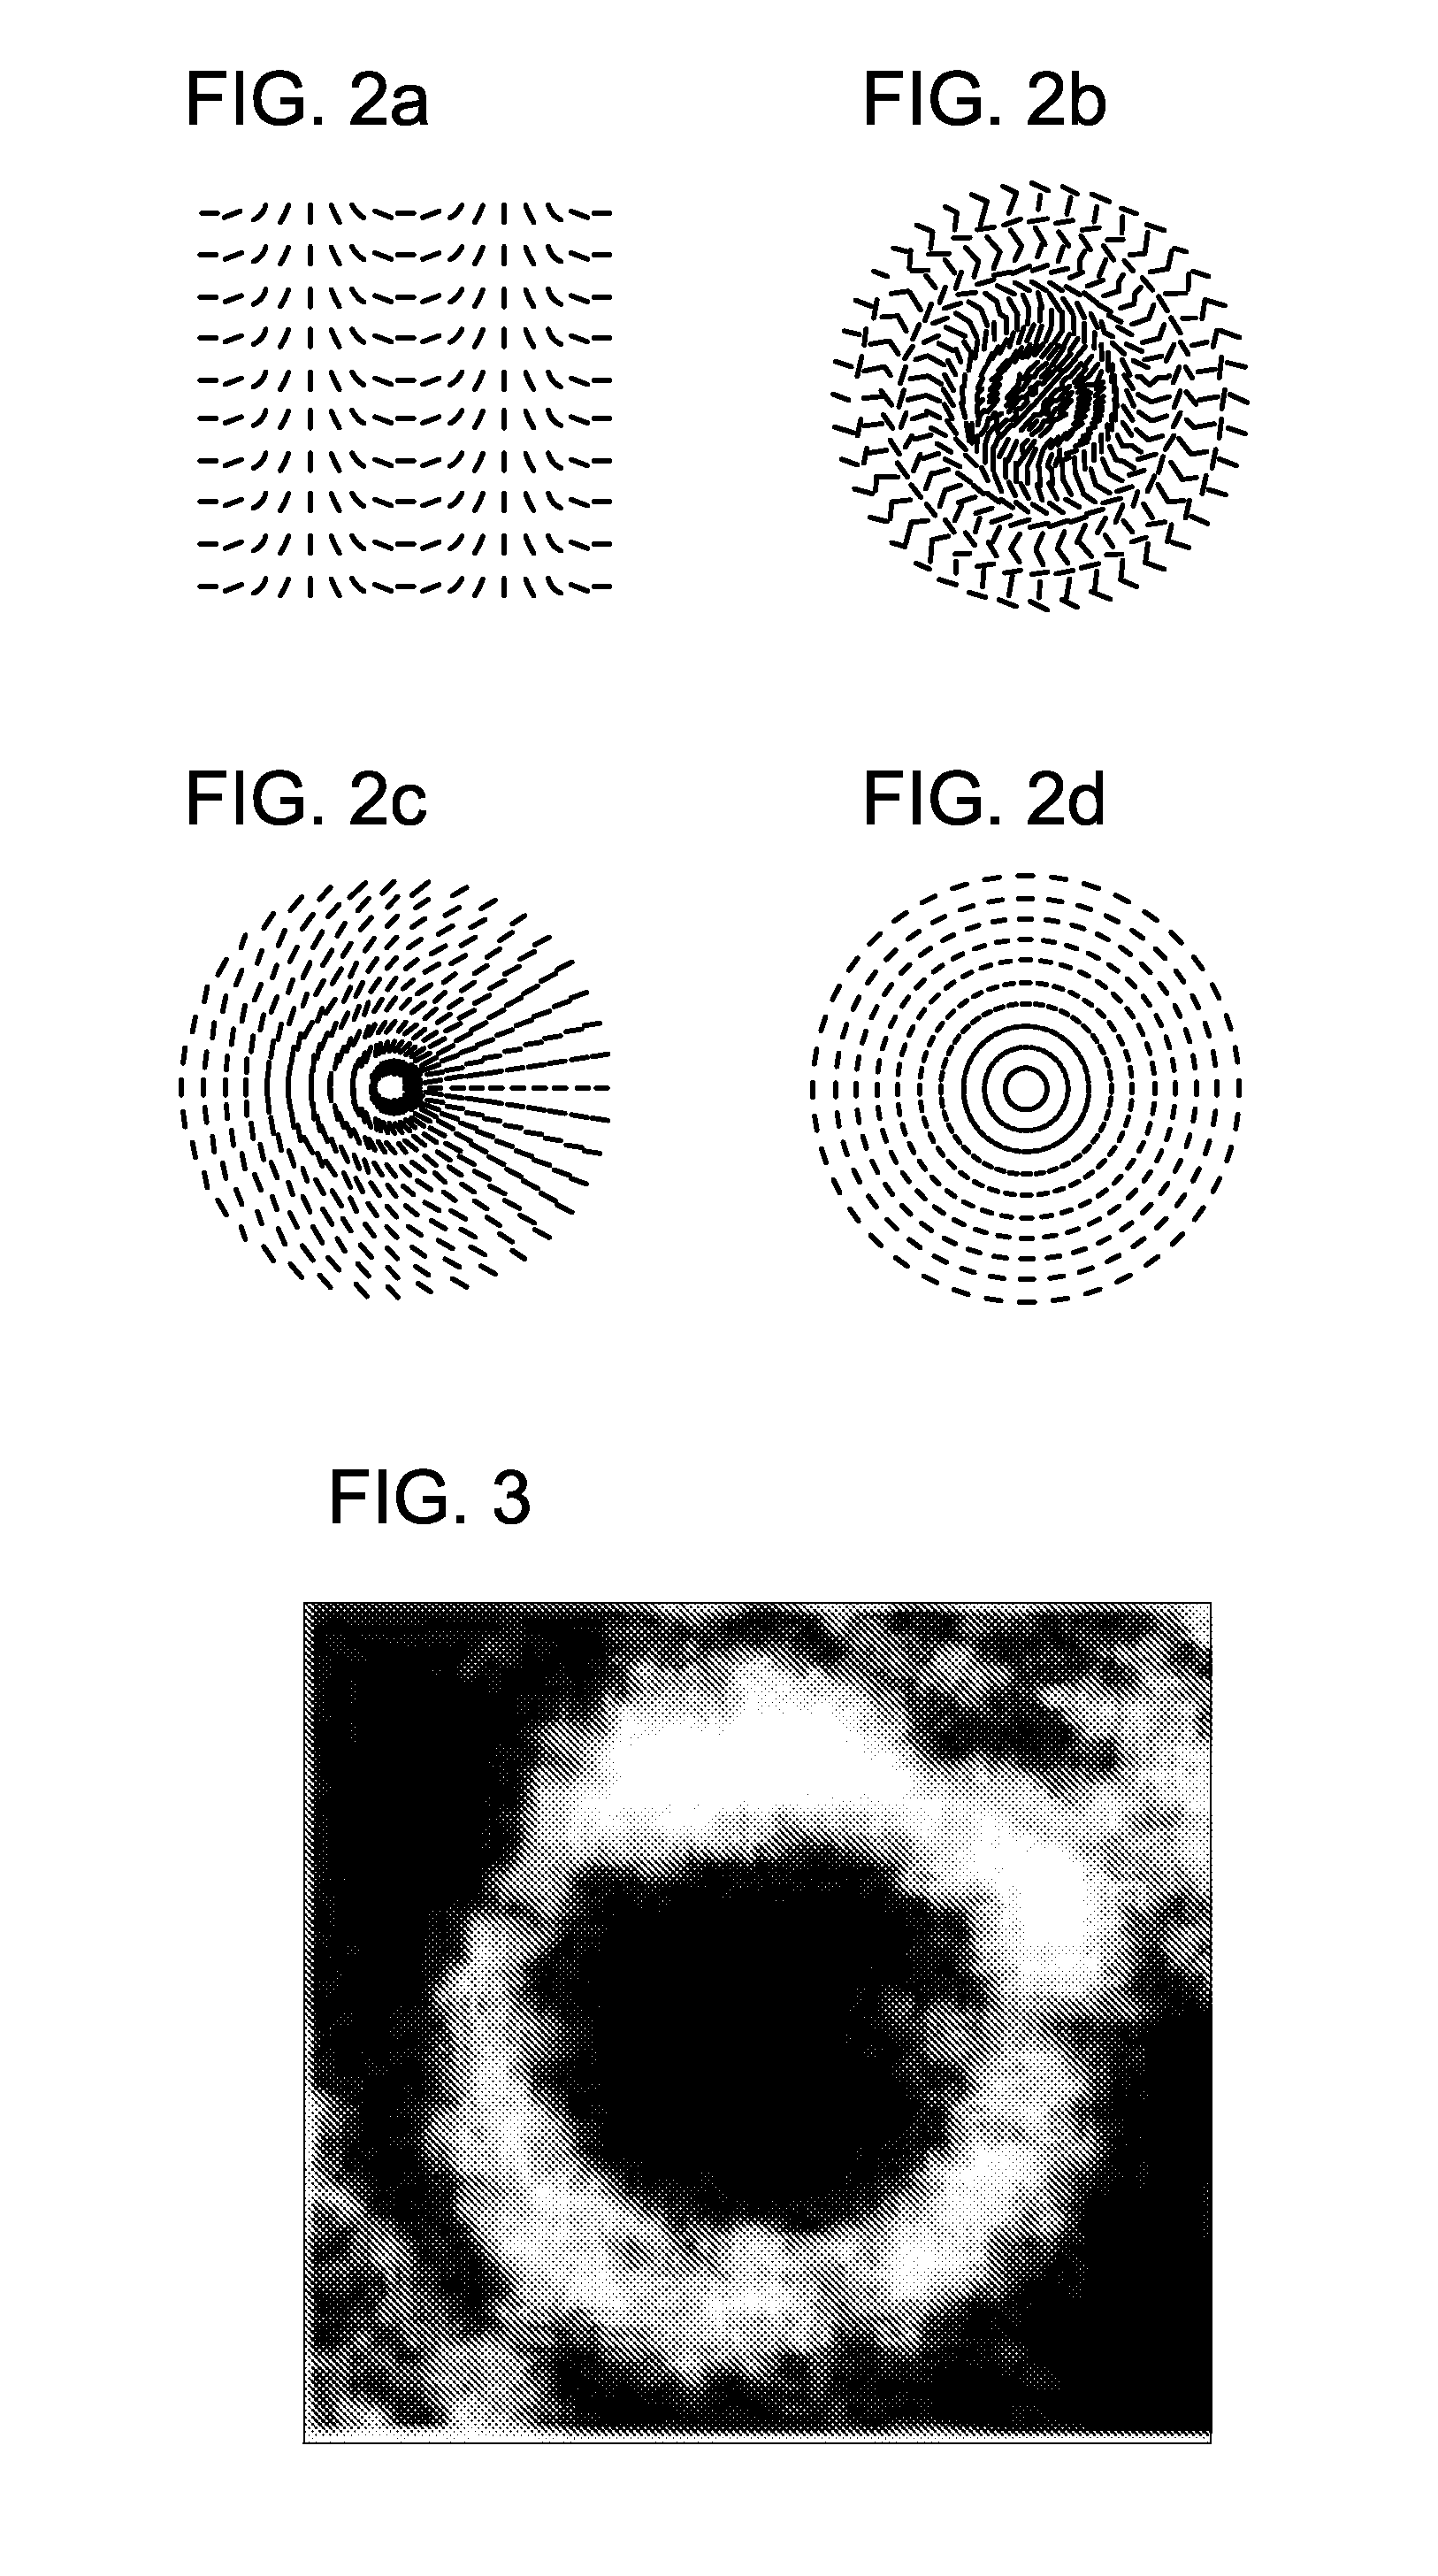 Liquid crystal geometrical phase optical elements and a system for generating and rapidly switching helical modes of an electromagnetic wave, based on these optical elements